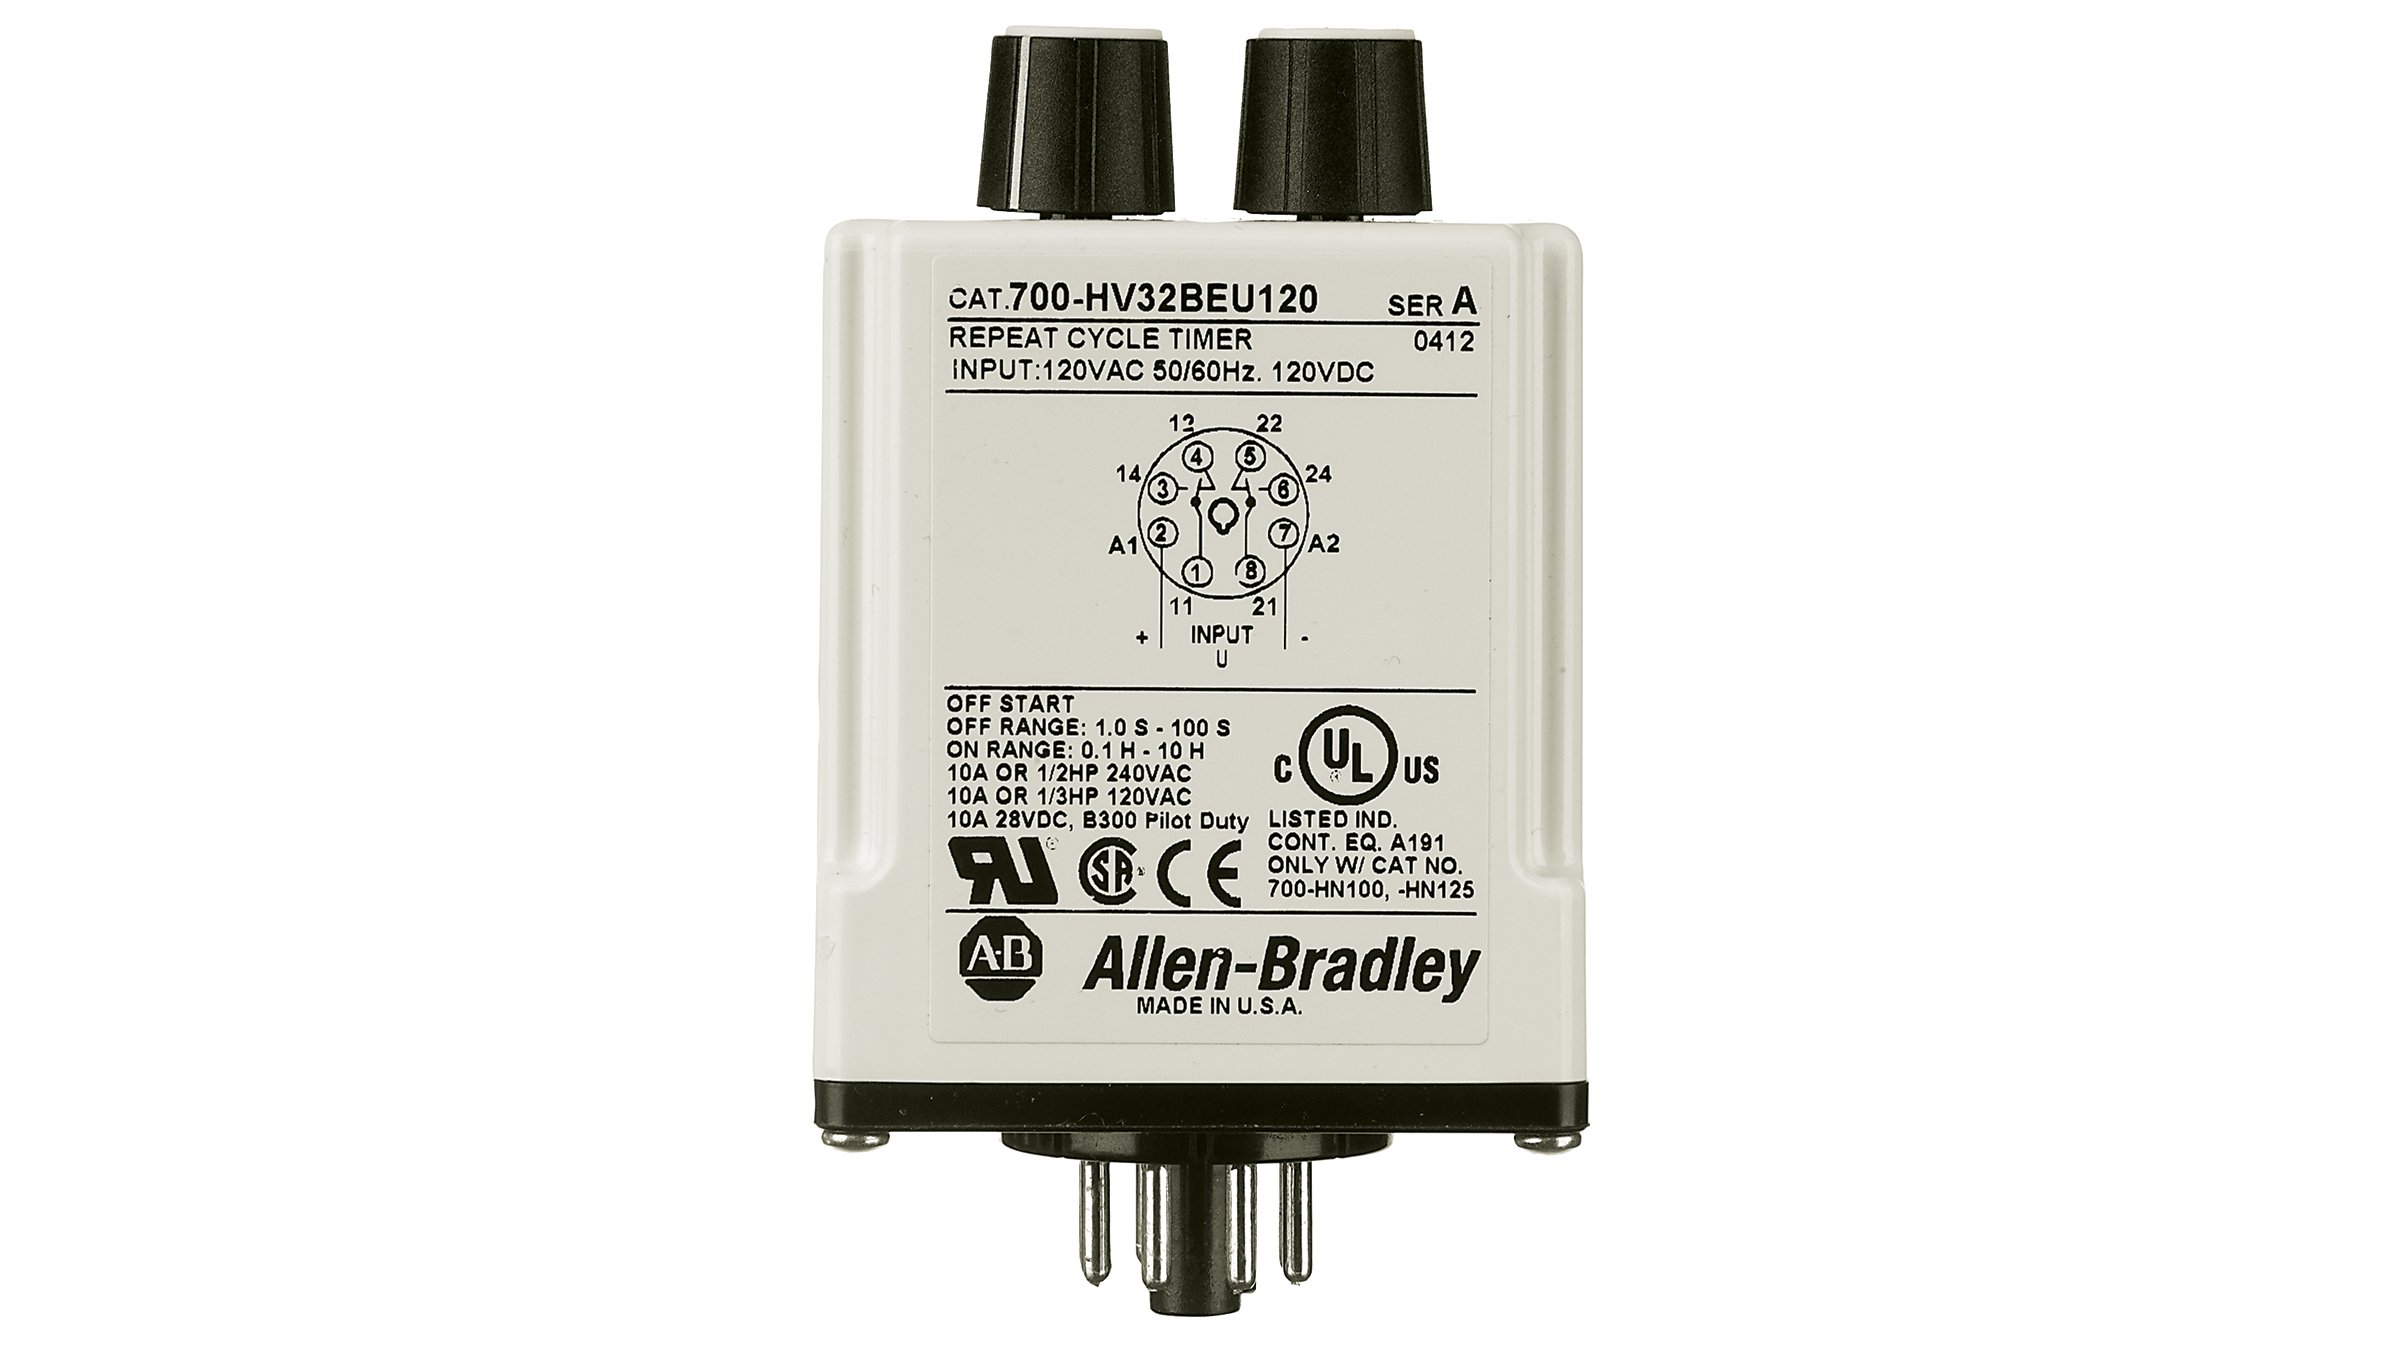 Allen-Bradley Bulletin 700-HV Repeat Cycle Timing Relays provide cycled on-off switching when a signal is applied.